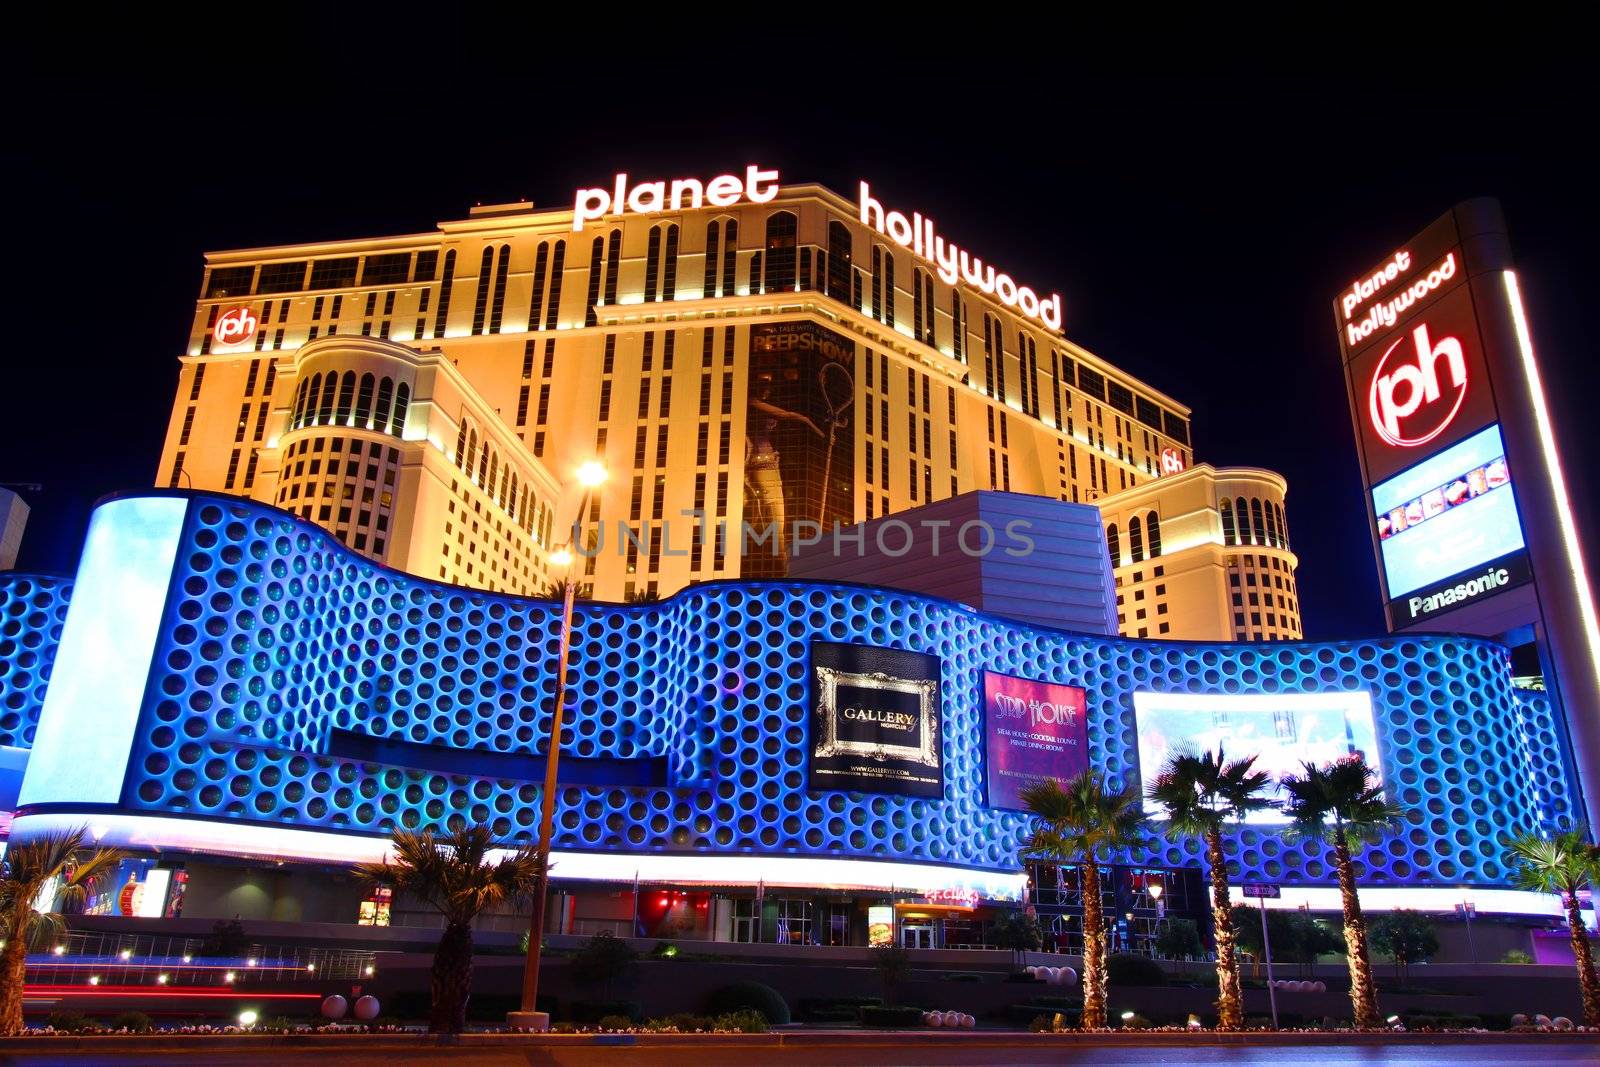 Las Vegas, USA - November 30, 2011: Planet Hollywood Resort and Casino on the Las Vegas Strip was formerly known as The Aladdin.  Seen here is the entrance and wavy light display along Las Vegas Boulevard.